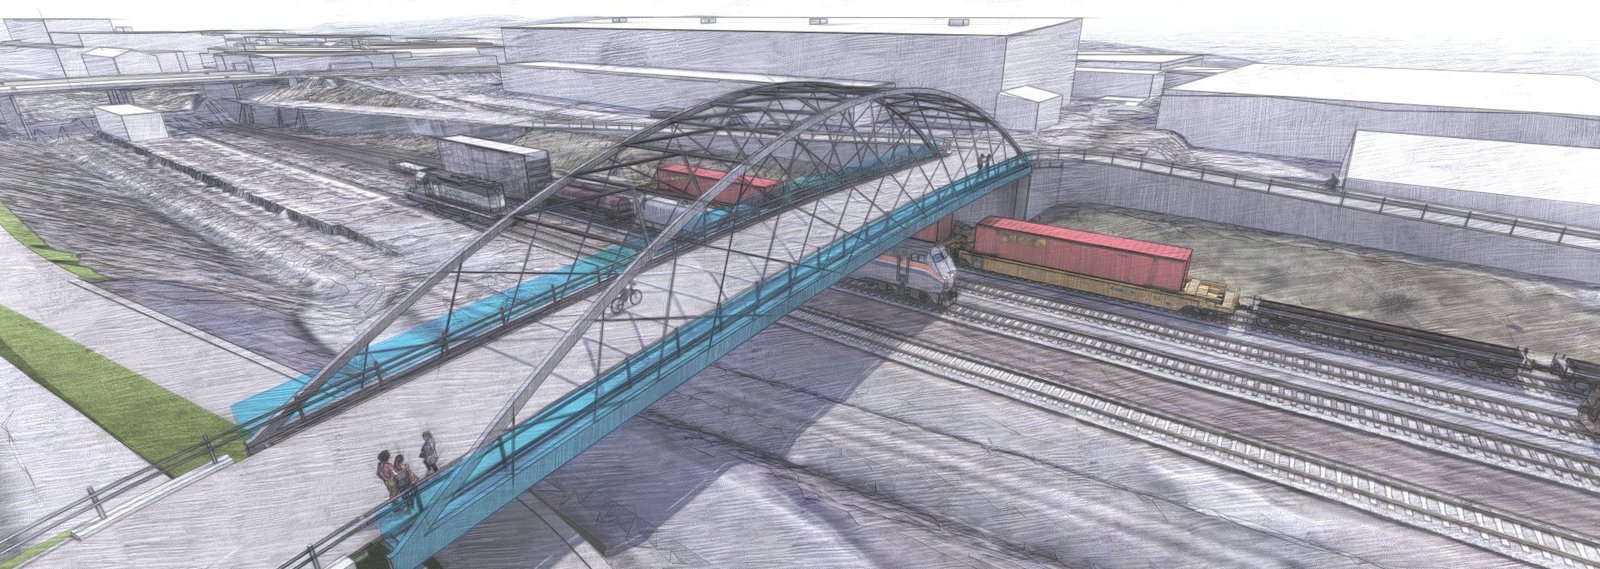 The upcoming hangar bridge in Trondheim is proposed to be built with aluminium